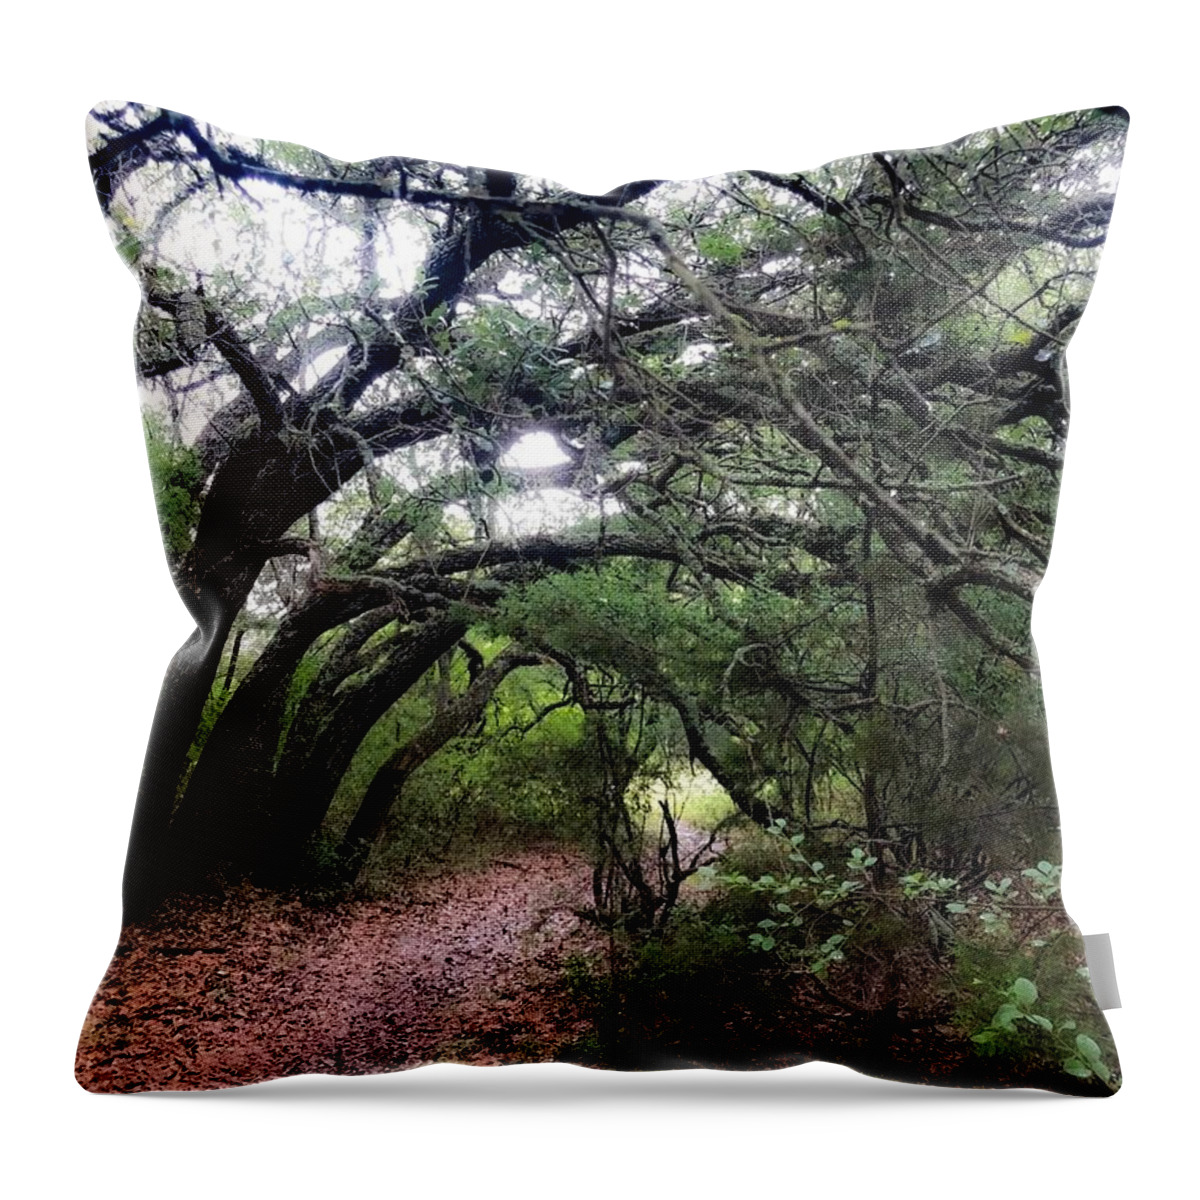 Landscape Throw Pillow featuring the photograph Fairytale Lane by Kelly Thackeray